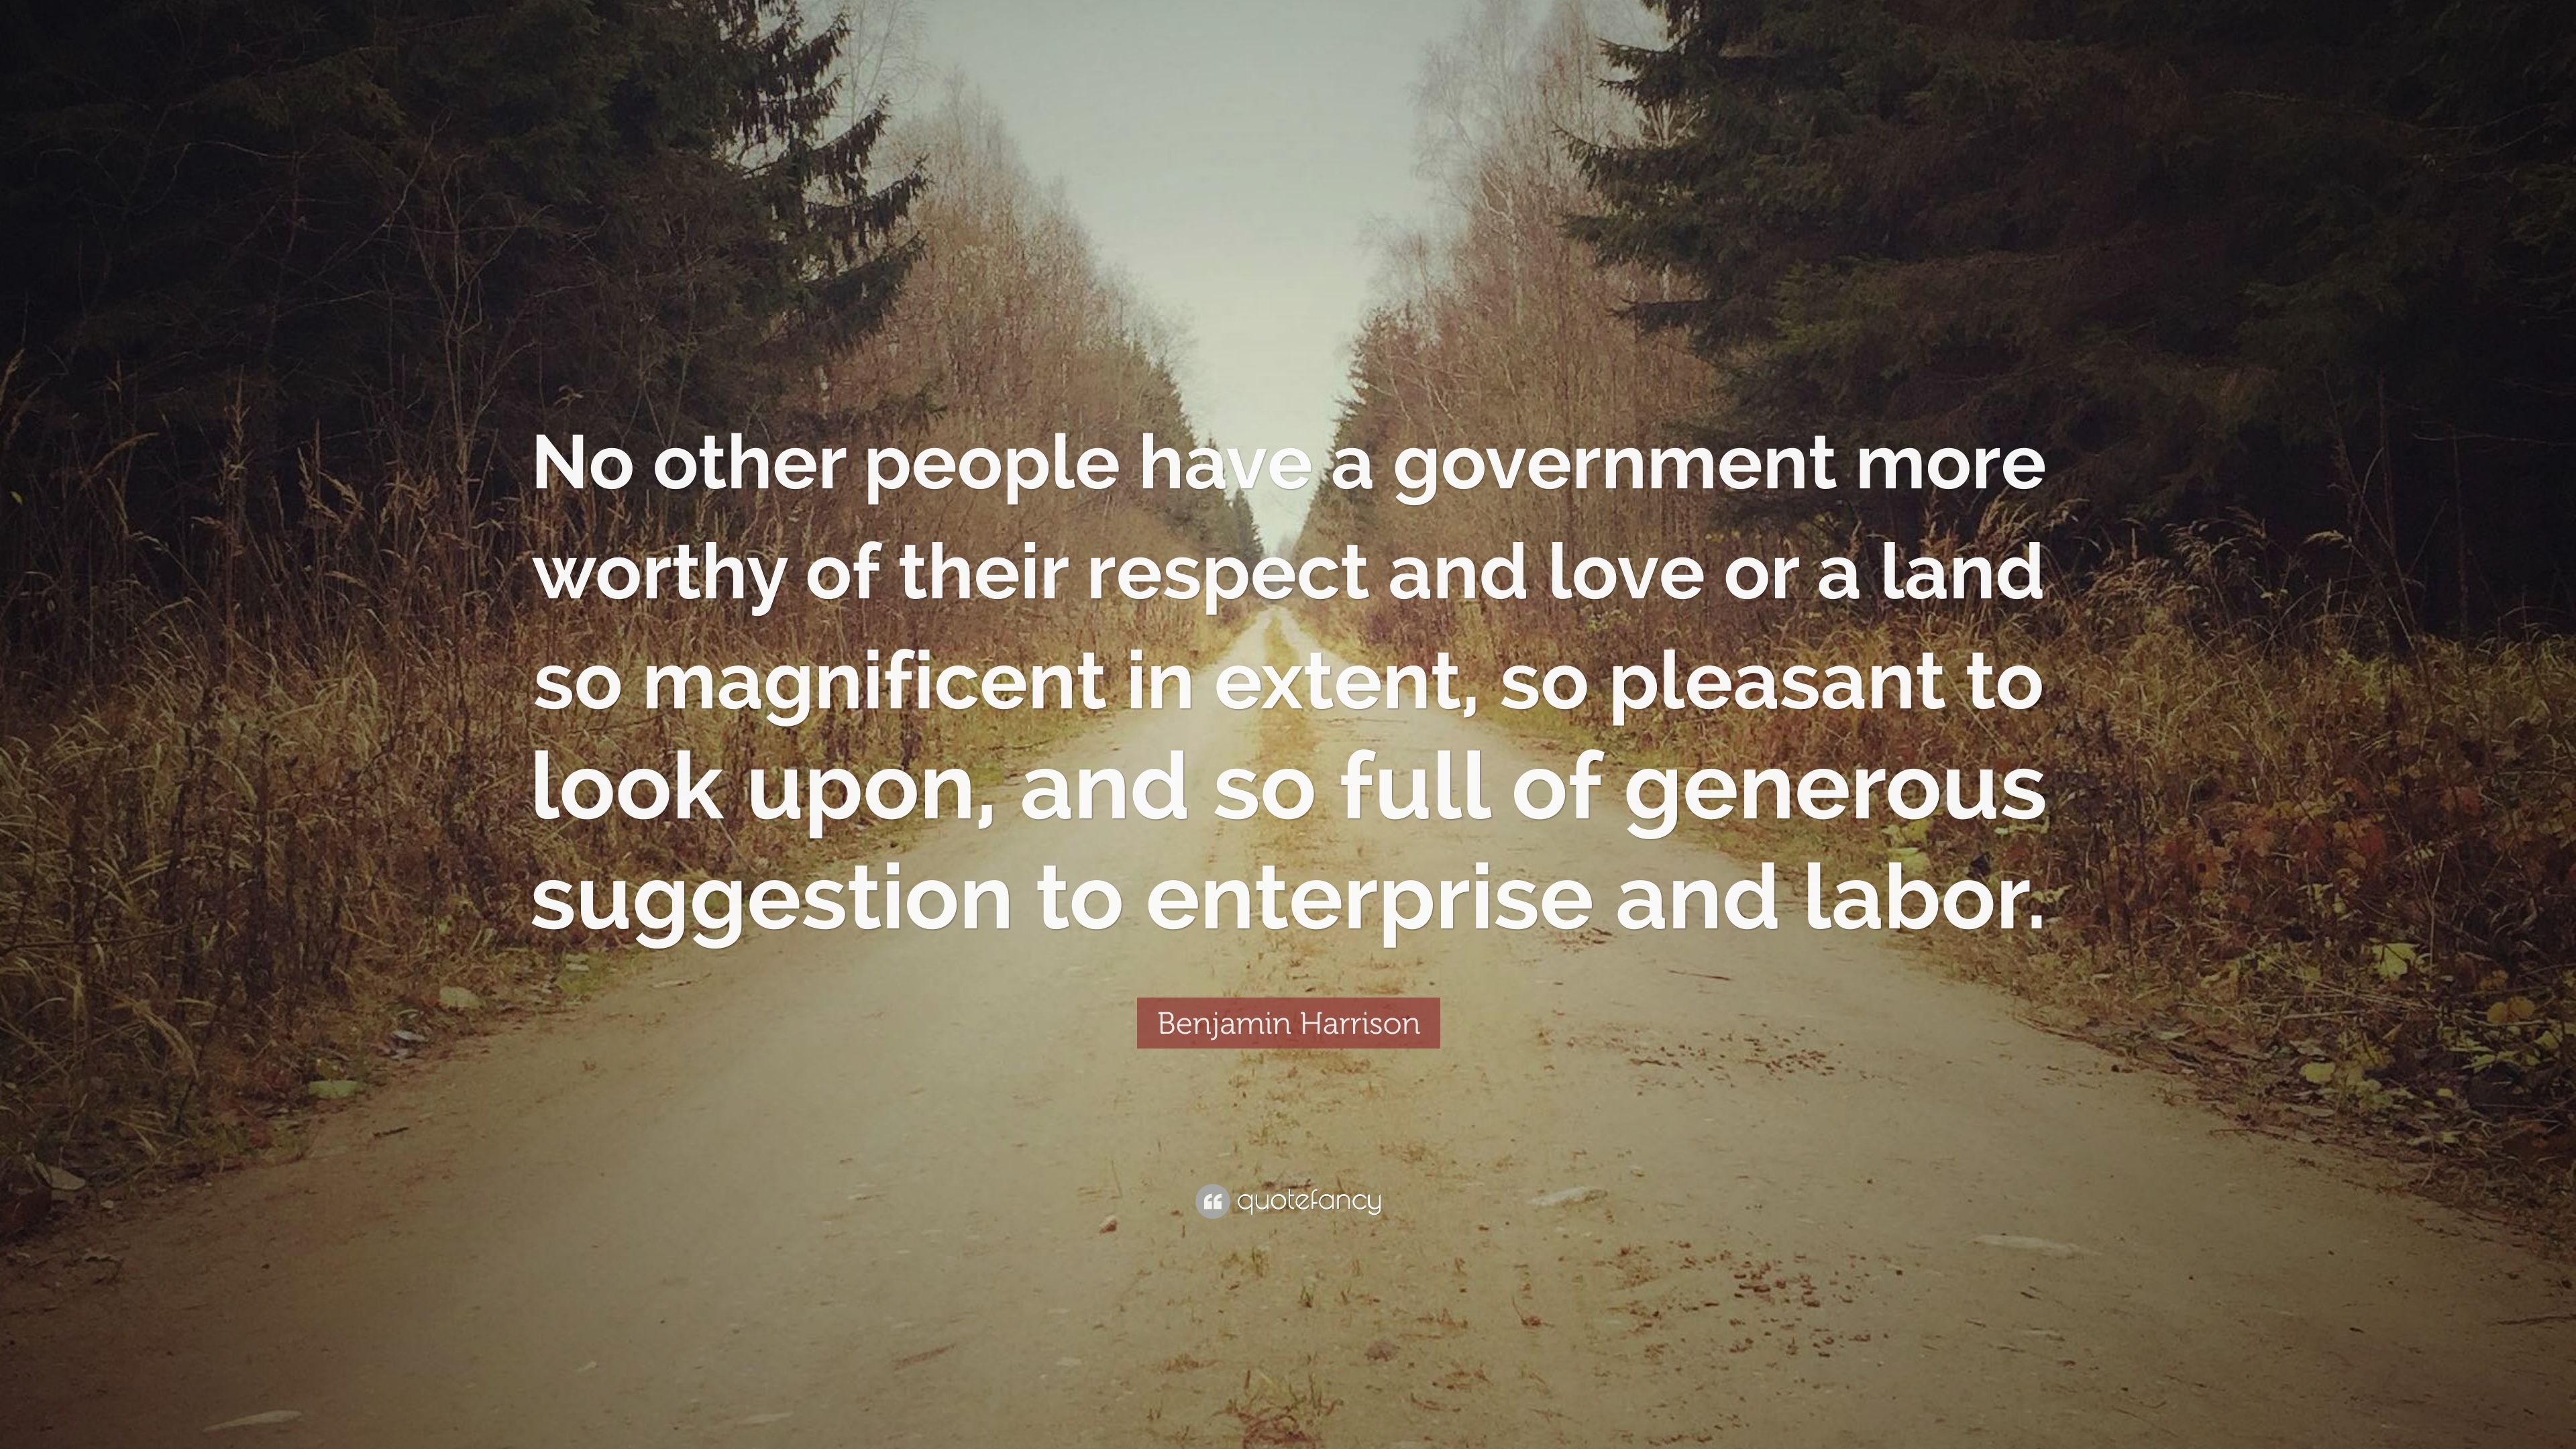 Benjamin Harrison Quote: “No other people have a government more